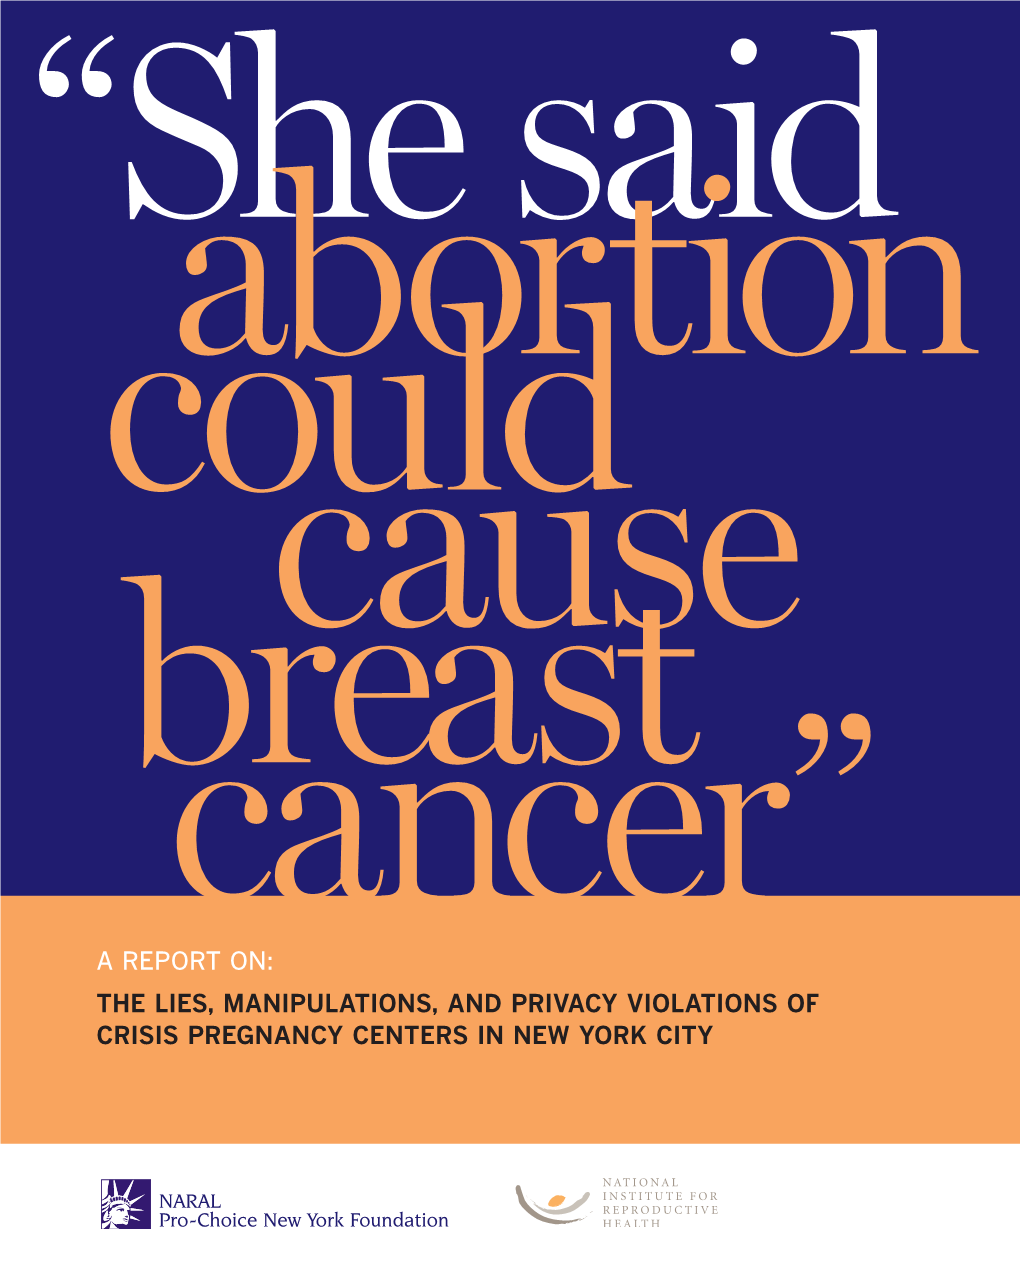 A Report On: the Lies, Manipulations, and Privacy Violations of Crisis Pregnancy Centers in New York City